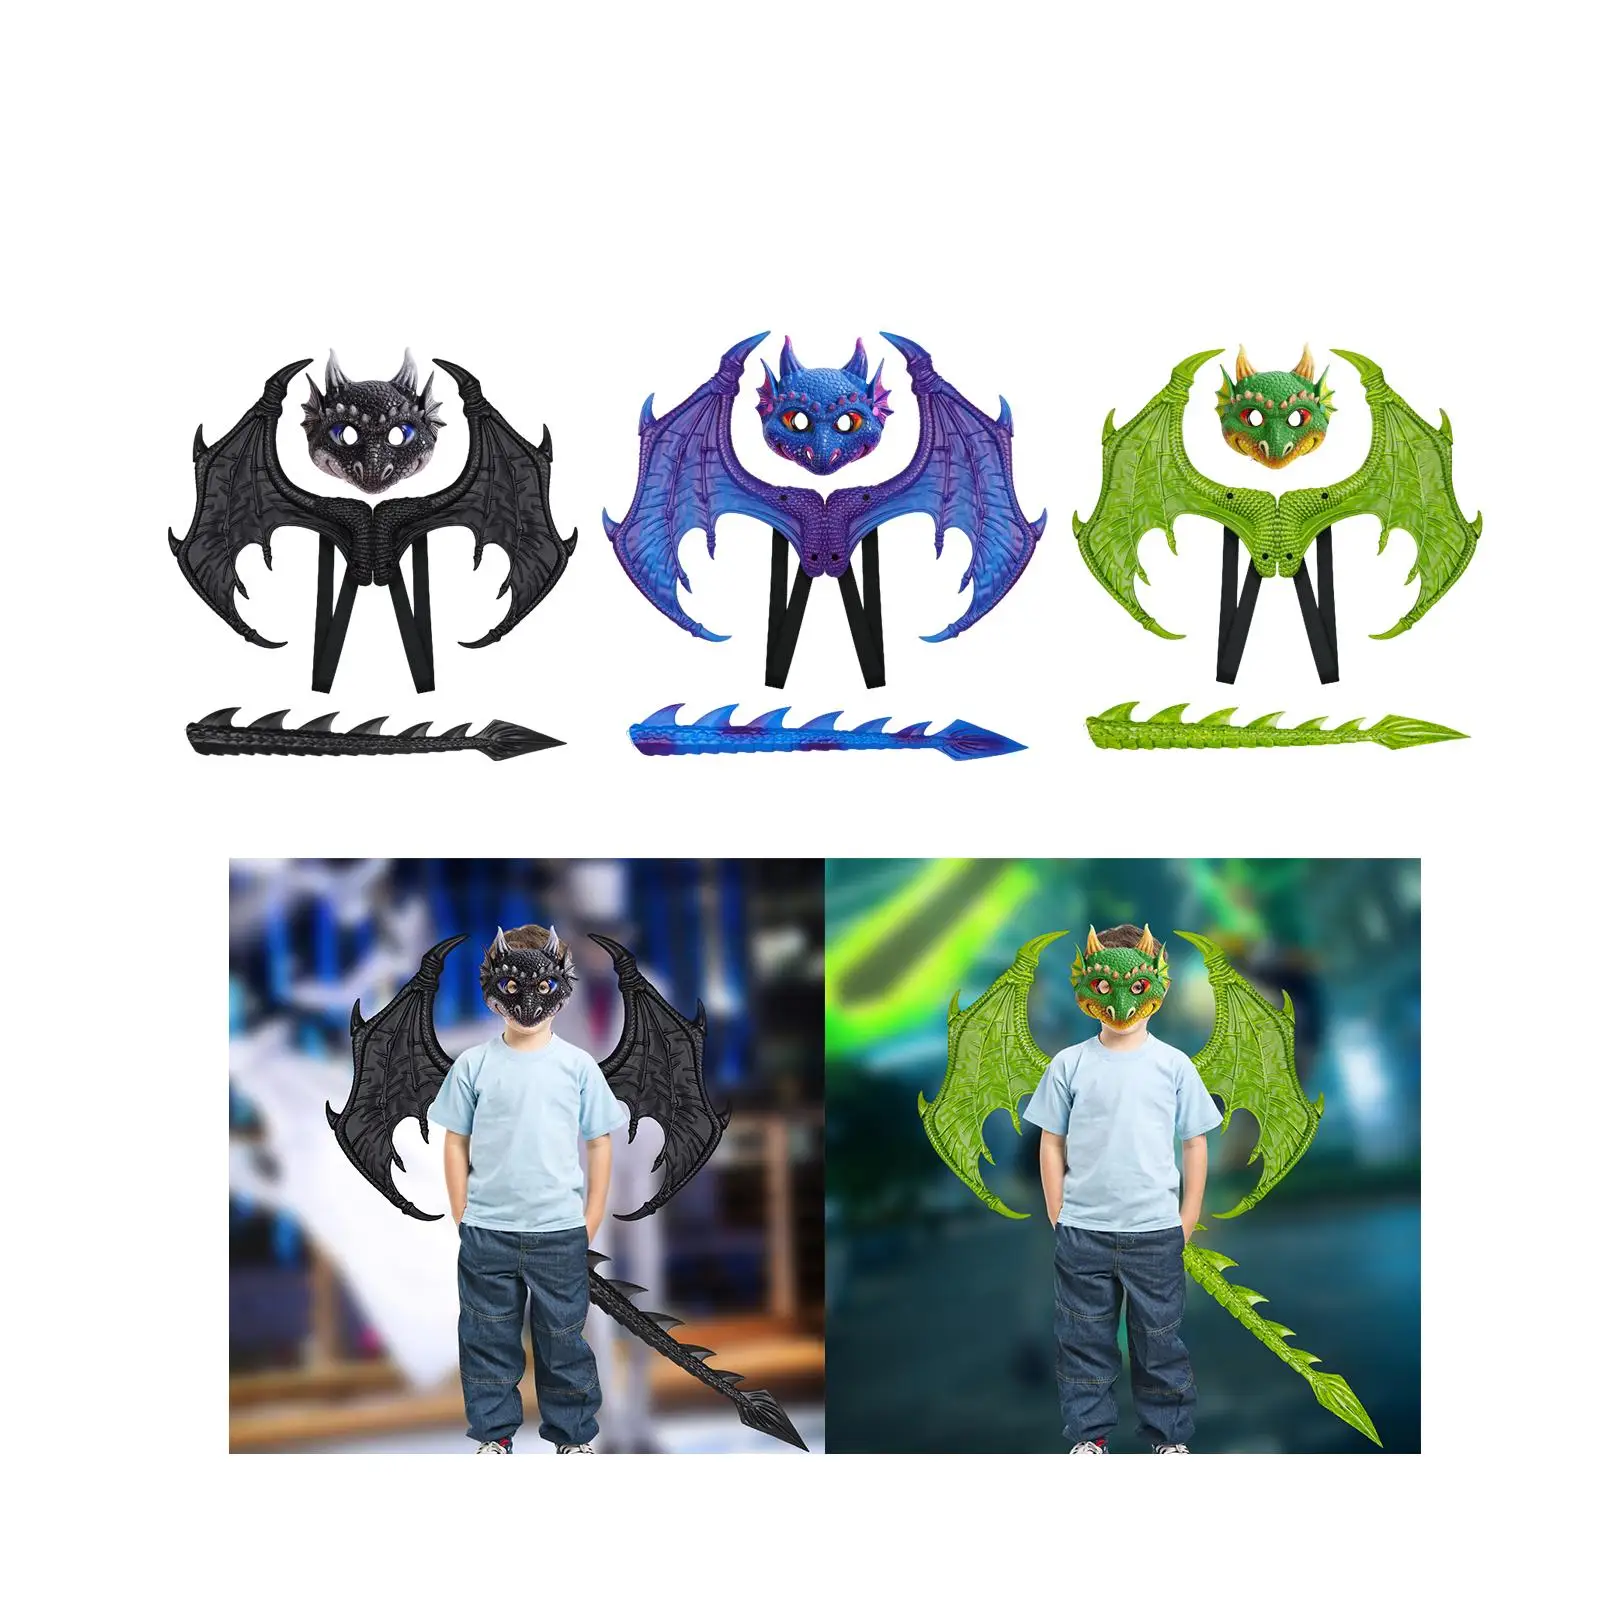 Dinosaur Tail Mask Wing Set Cosplay Dragon Costume for Kids for Clothes Decoration Pretend Play Nightclub Fancy Dress Masquerade